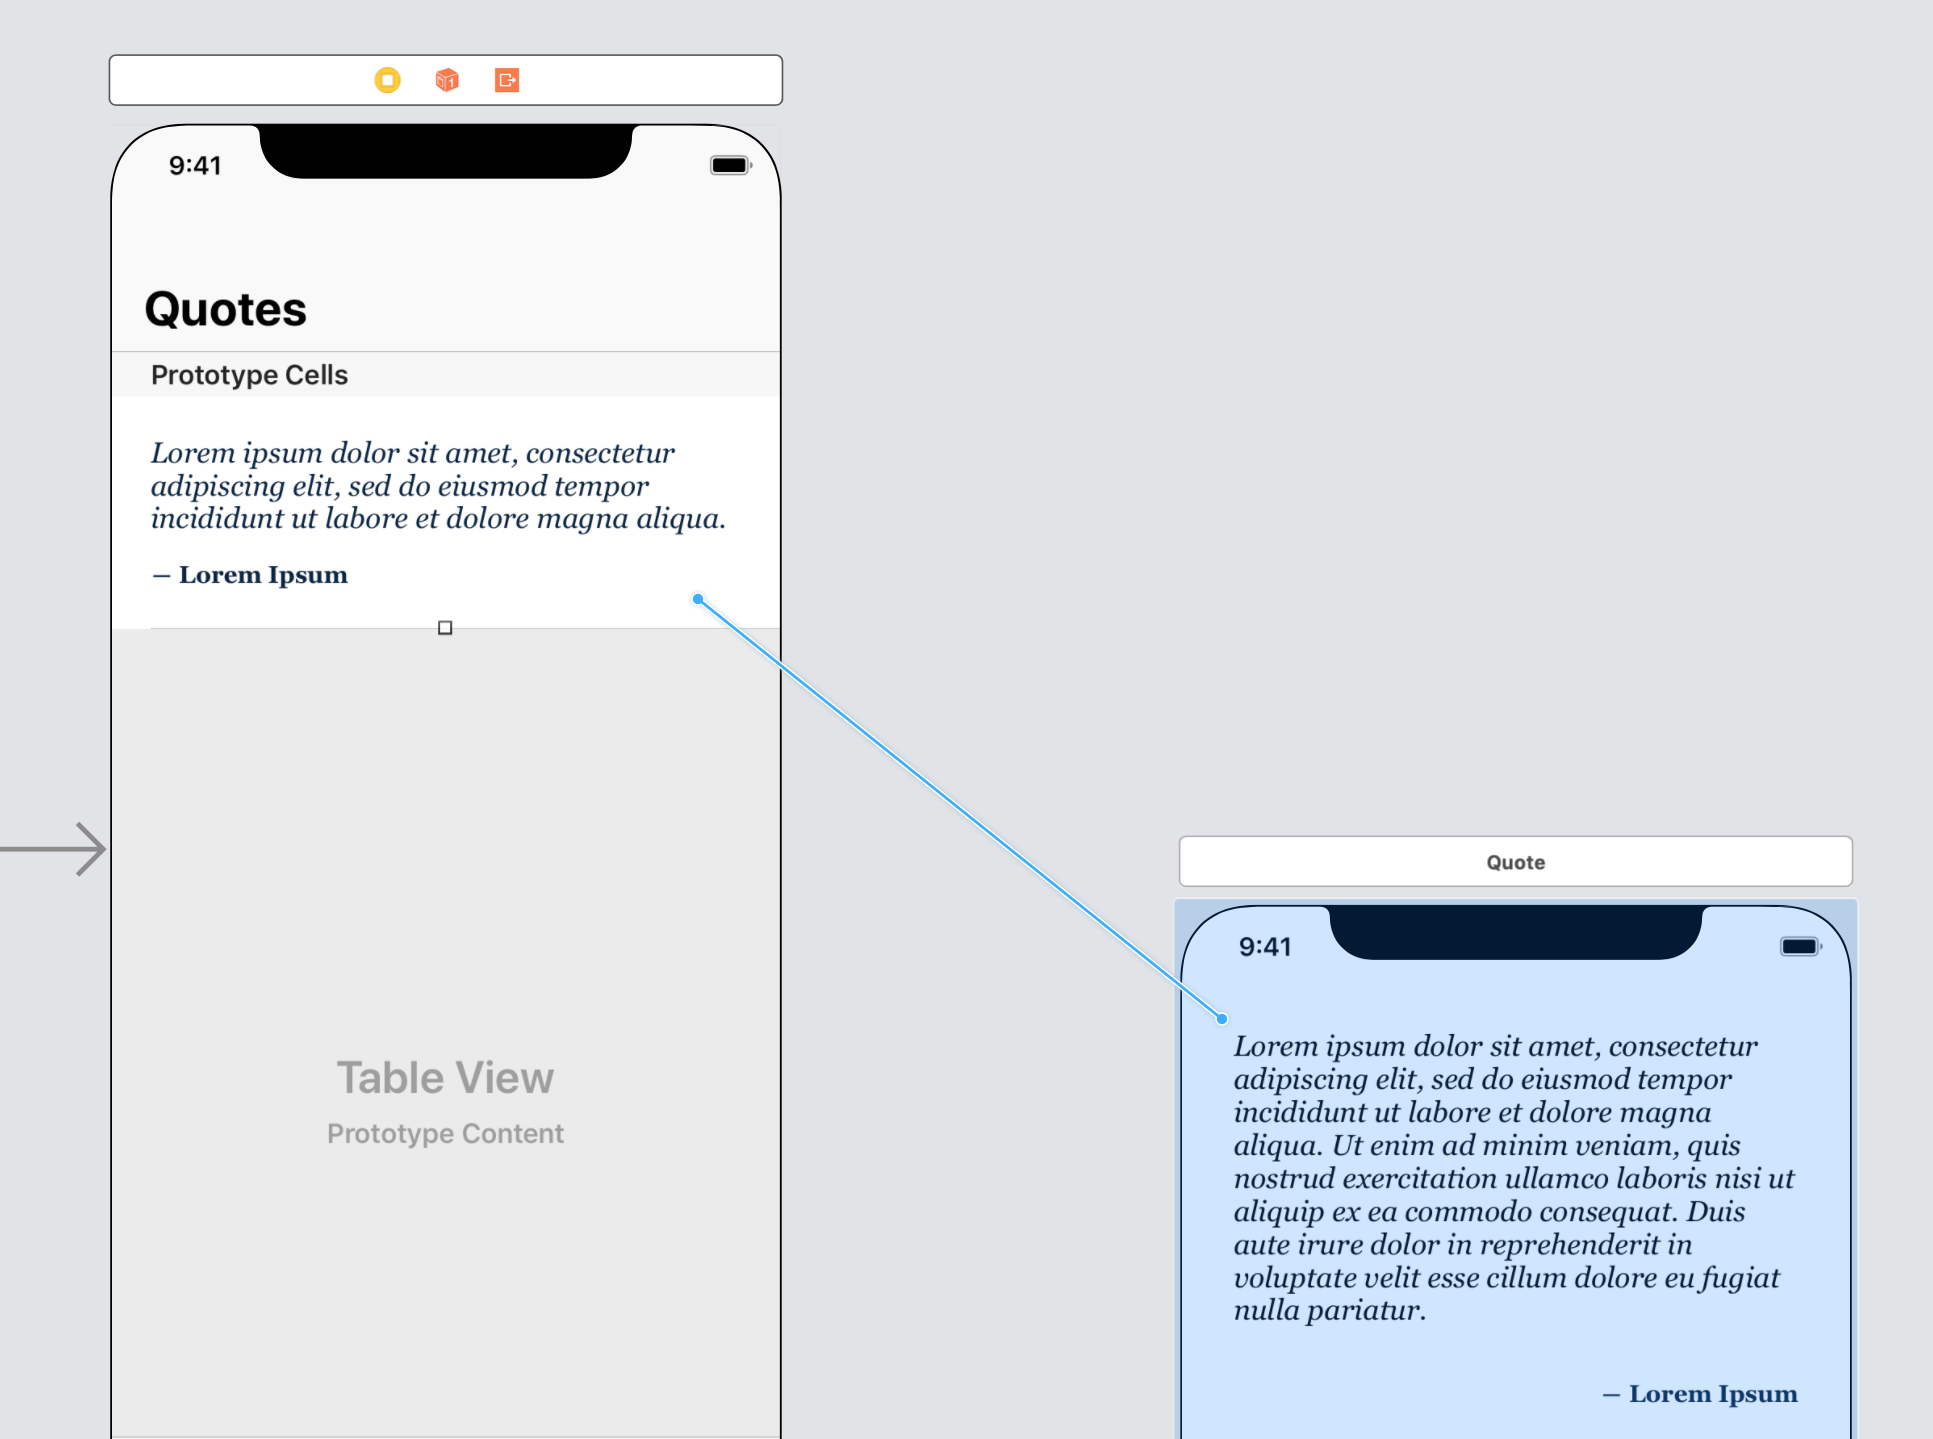 connecting a segue from a uitableview cell prototype to another view controller scene in a storyboard